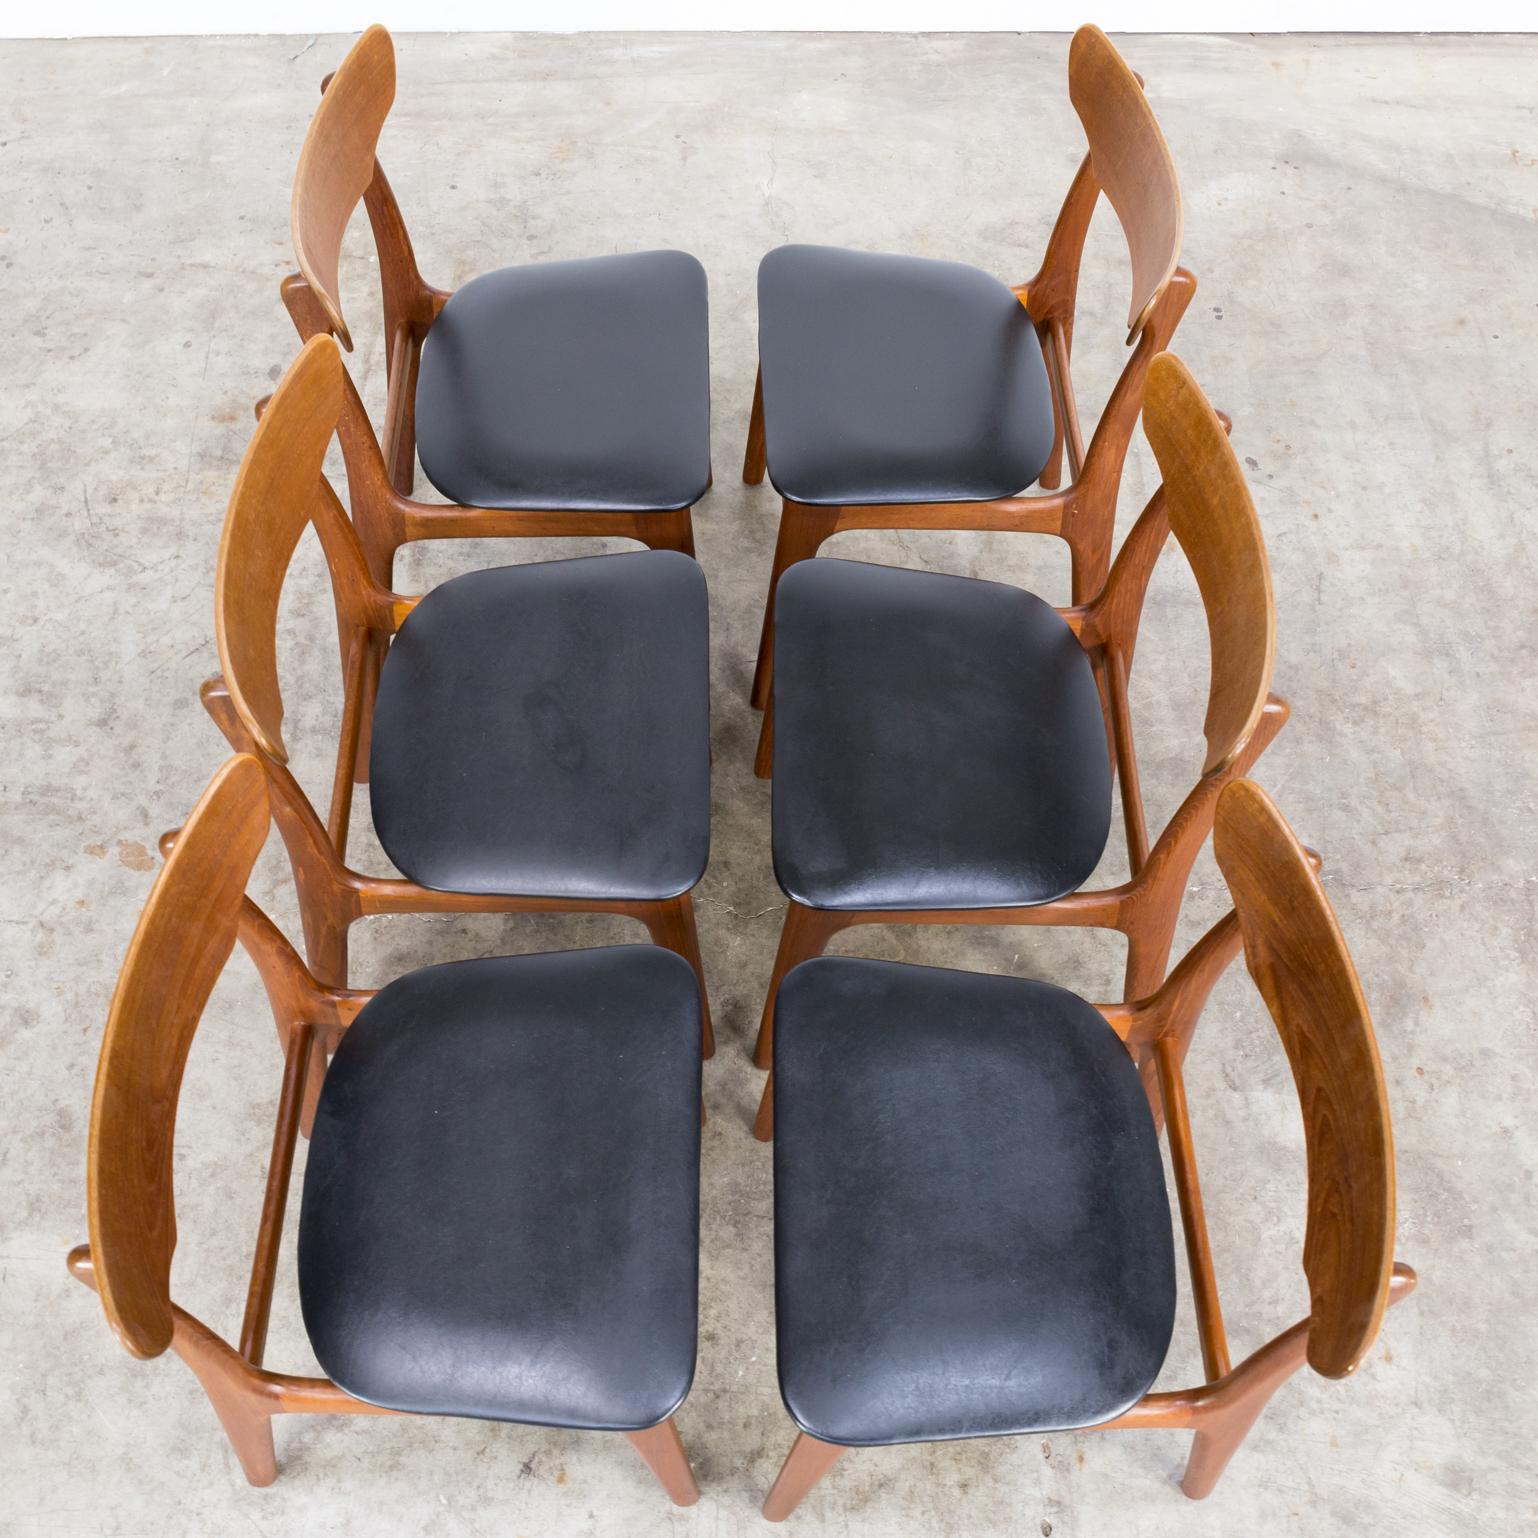 1960s Schionning and Elgaard Teak Dining Chair for Randers Set of Six For Sale 4